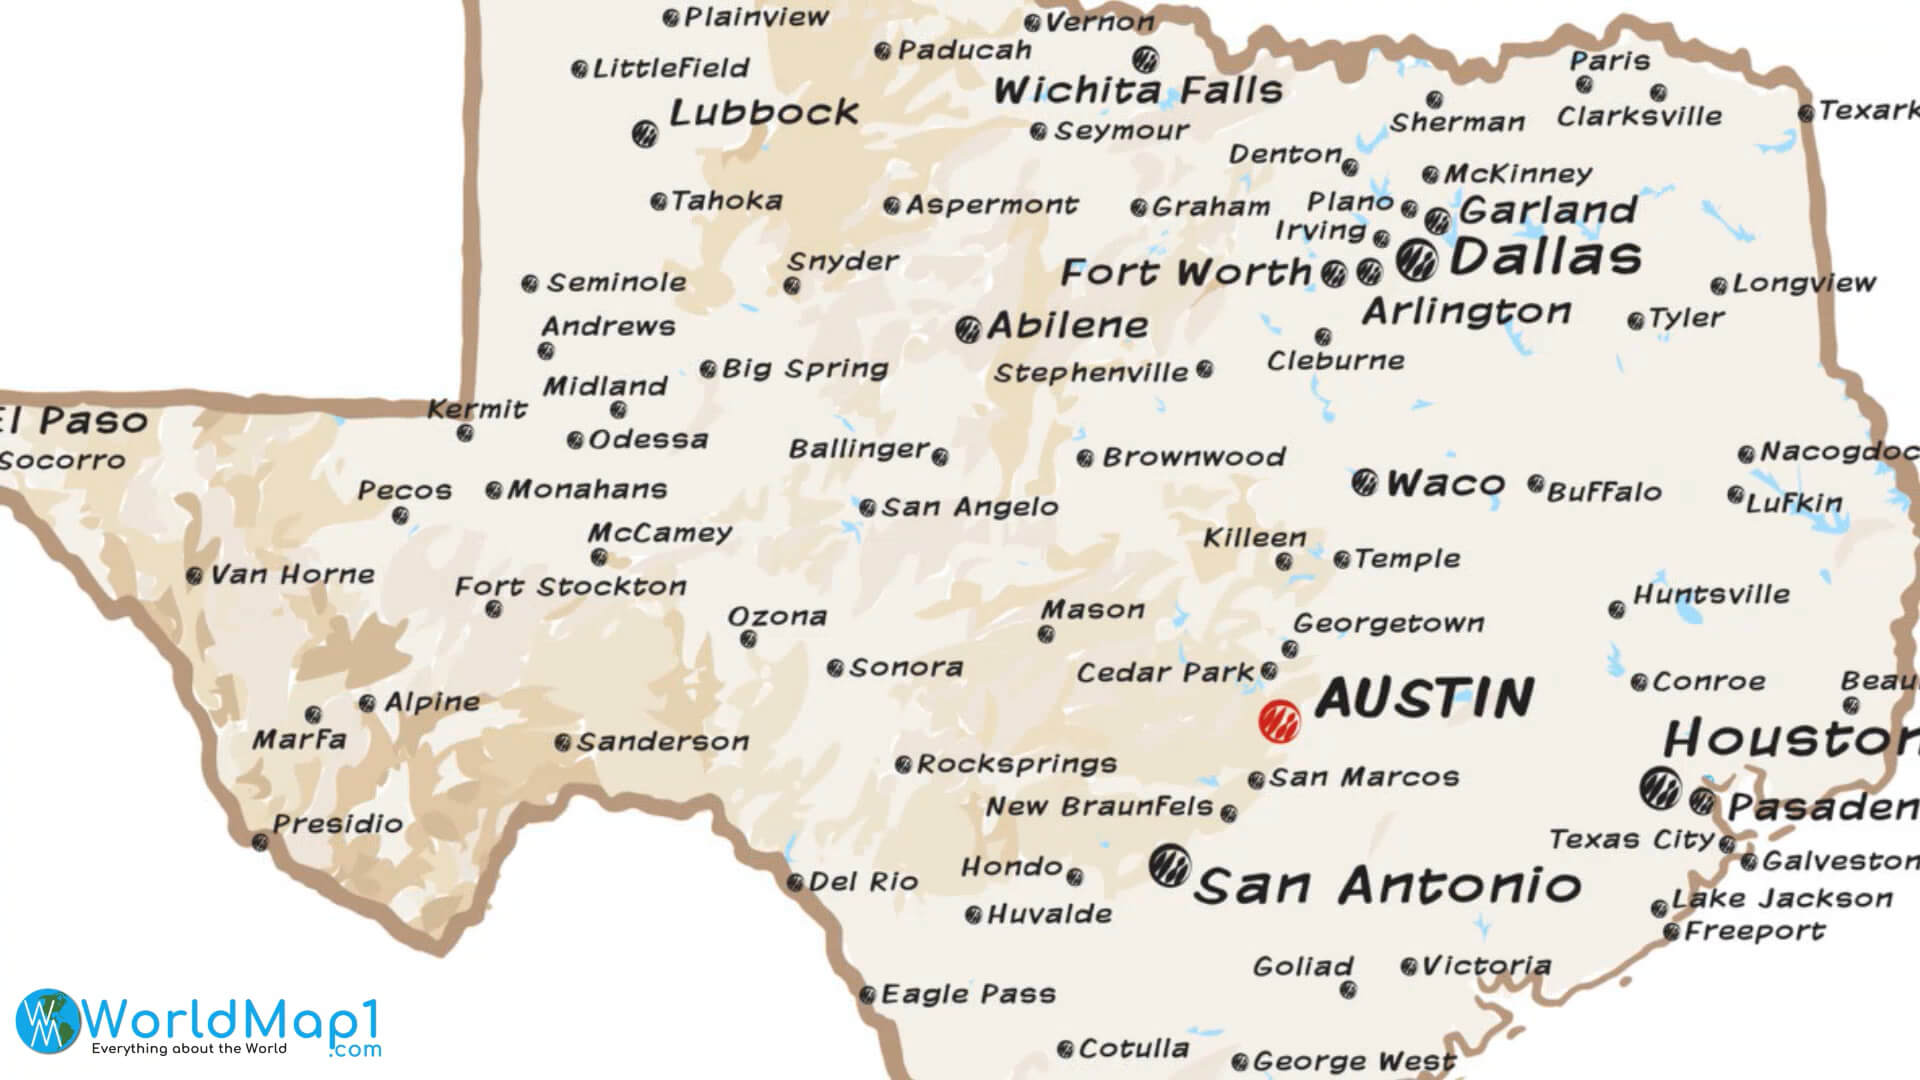 Major Cities Map of Texas